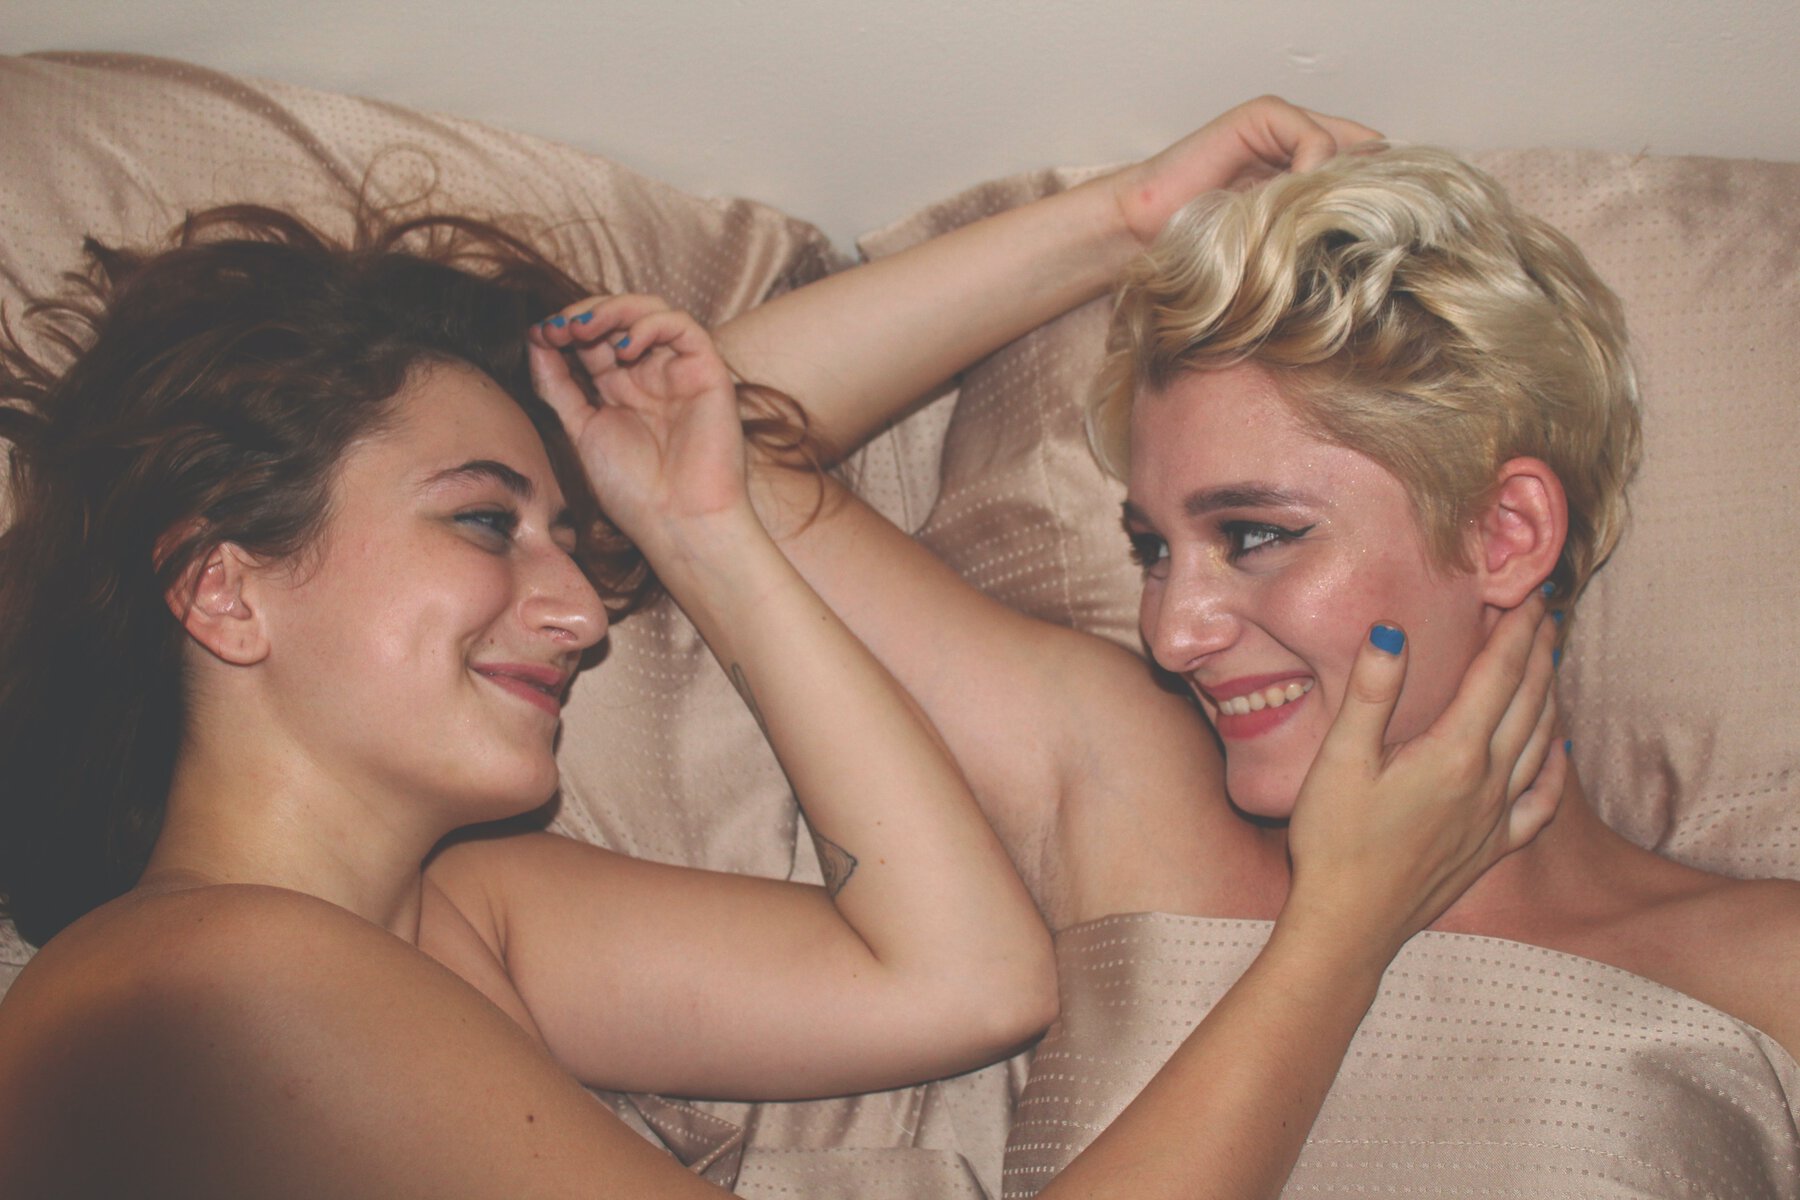 lesbian couple lying together in bed